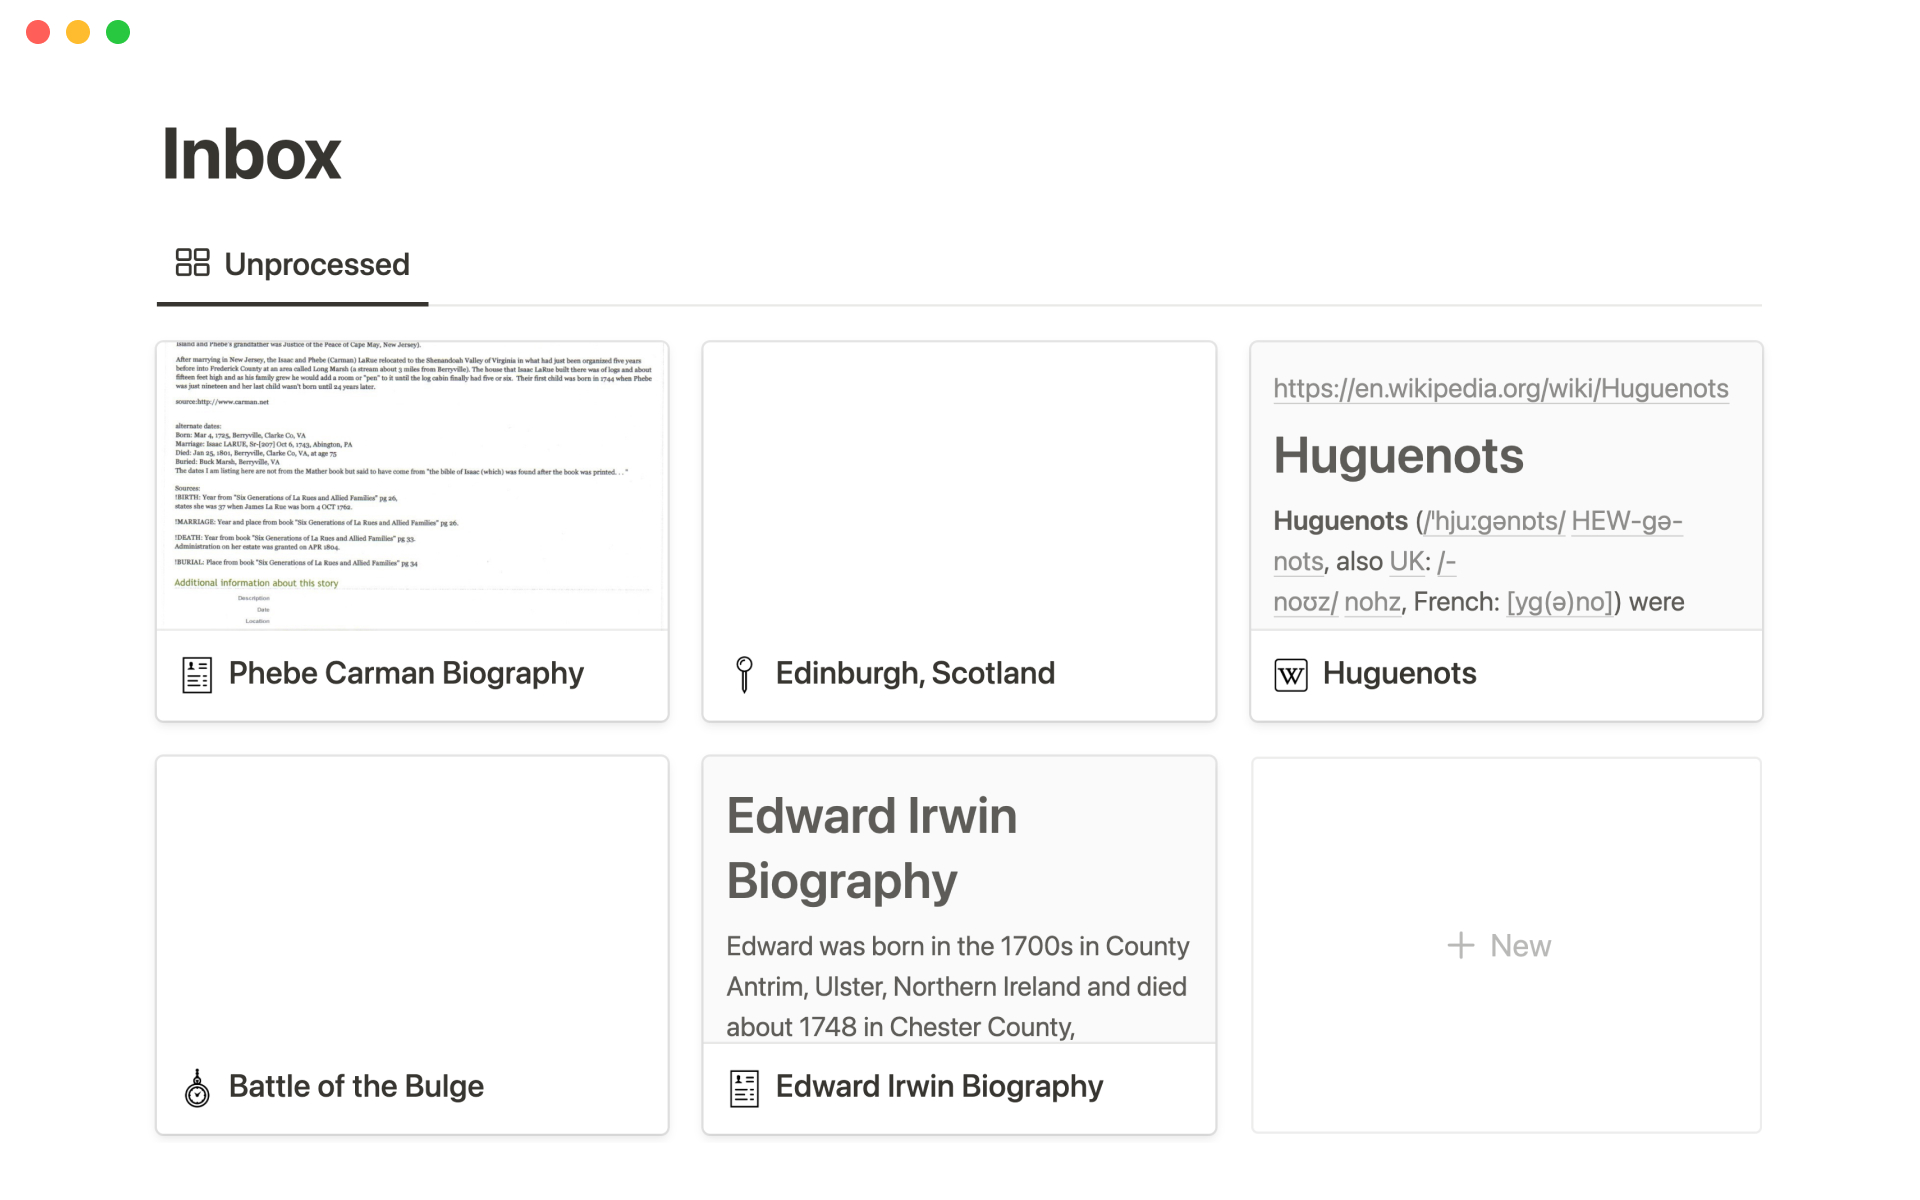 Power your genealogy research with Notion.